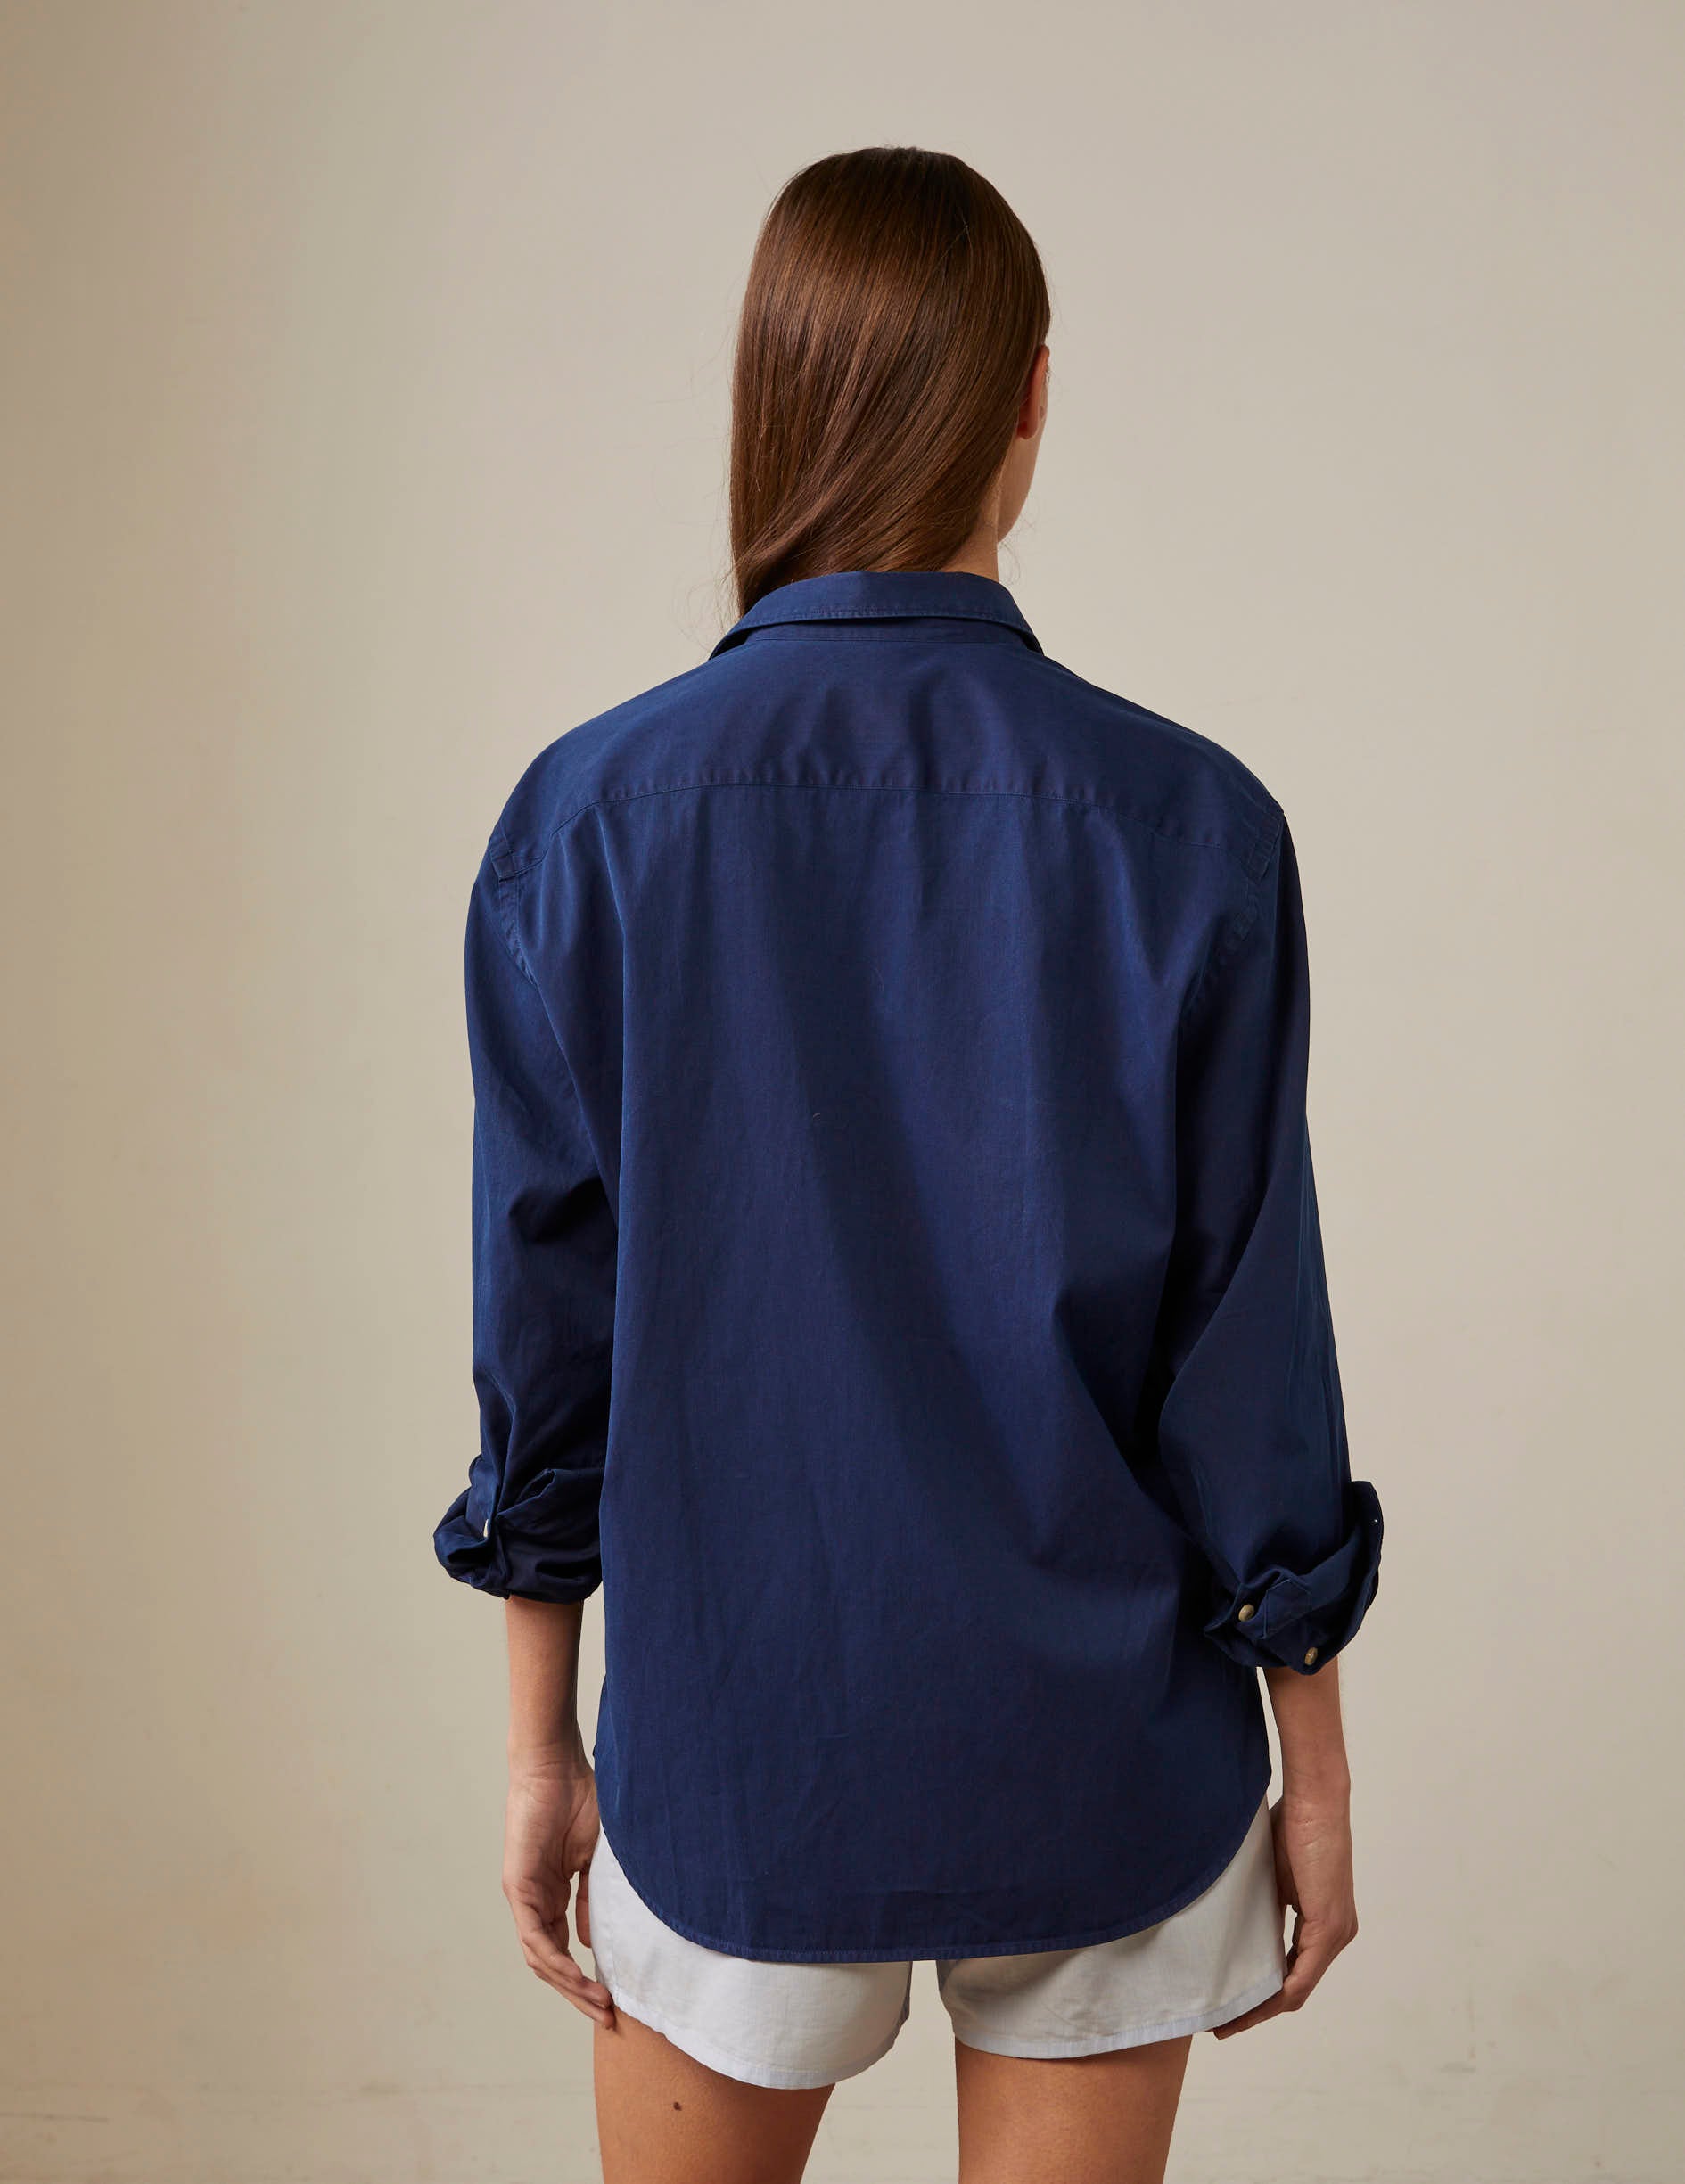 Denim "Je t'aime" shirt with red embroidery - Denim - Figaret Collar